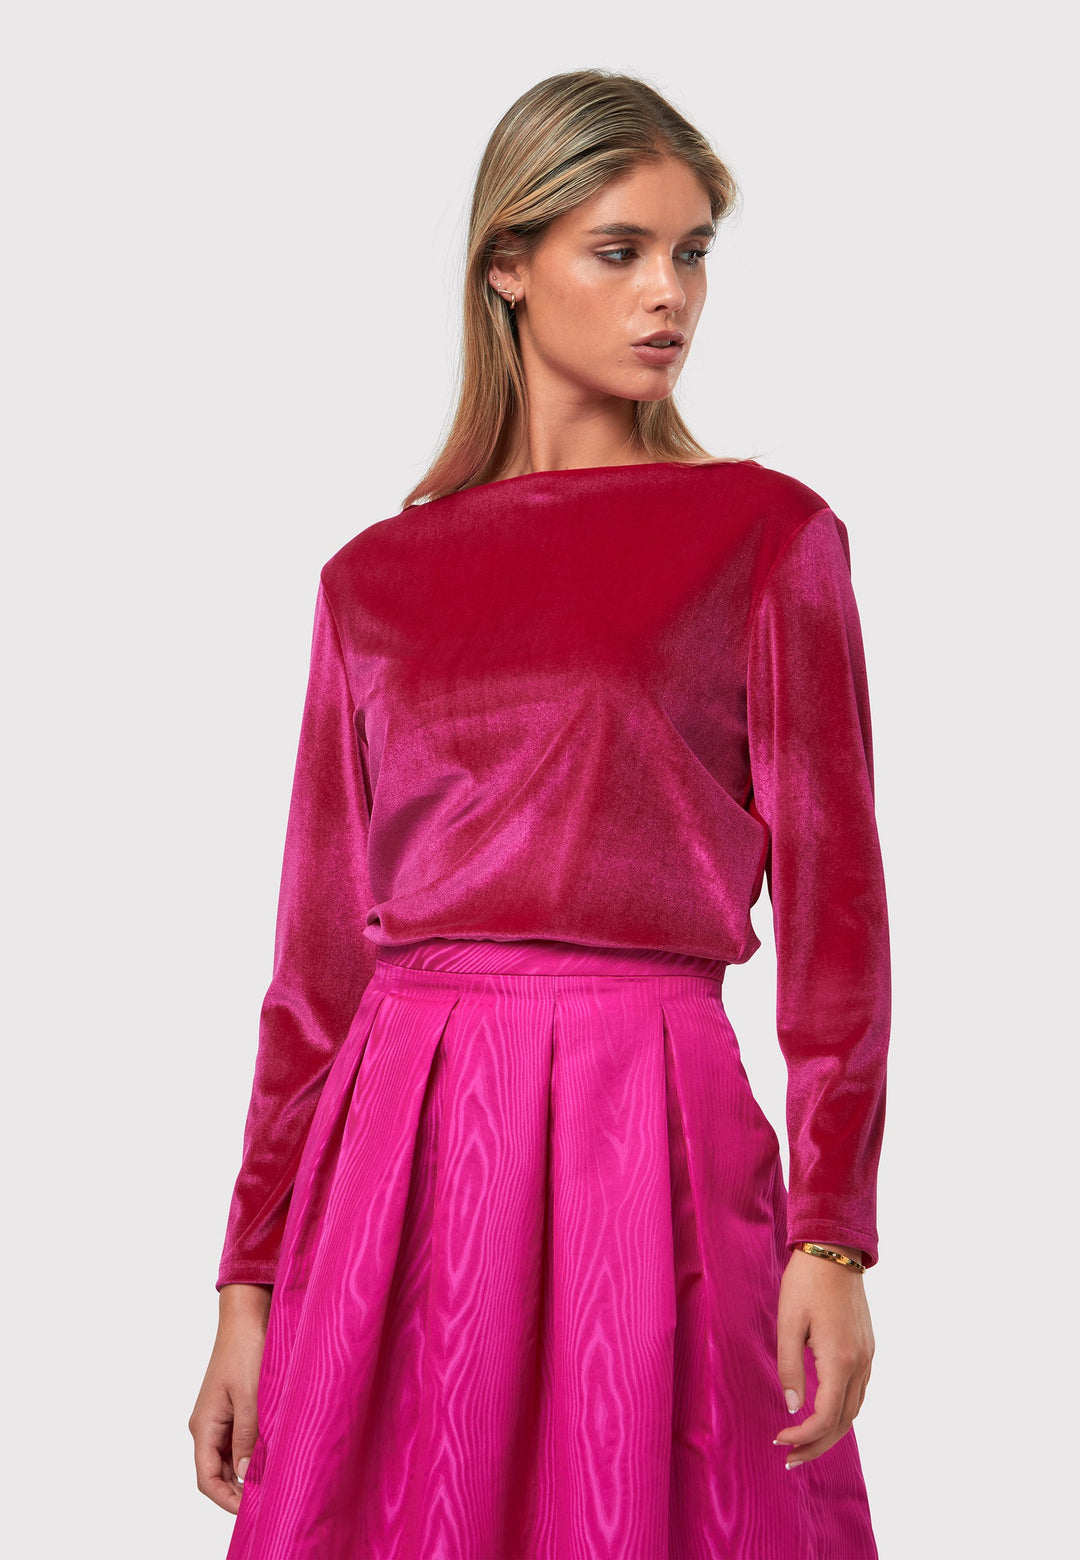 Introducing the Teagan Fuchsia Velvet Top, a refined and stylish boat neck blouse that exudes sophistication. Crafted from sumptuous fuchsia stretch velvet, this top radiates opulence and elegance. Its timeless design makes it a versatile piece that can be effortlessly paired with various separates. Whether you're going out for a night on the town or attending a formal event, the Teagan Velvet Top is the perfect choice. 